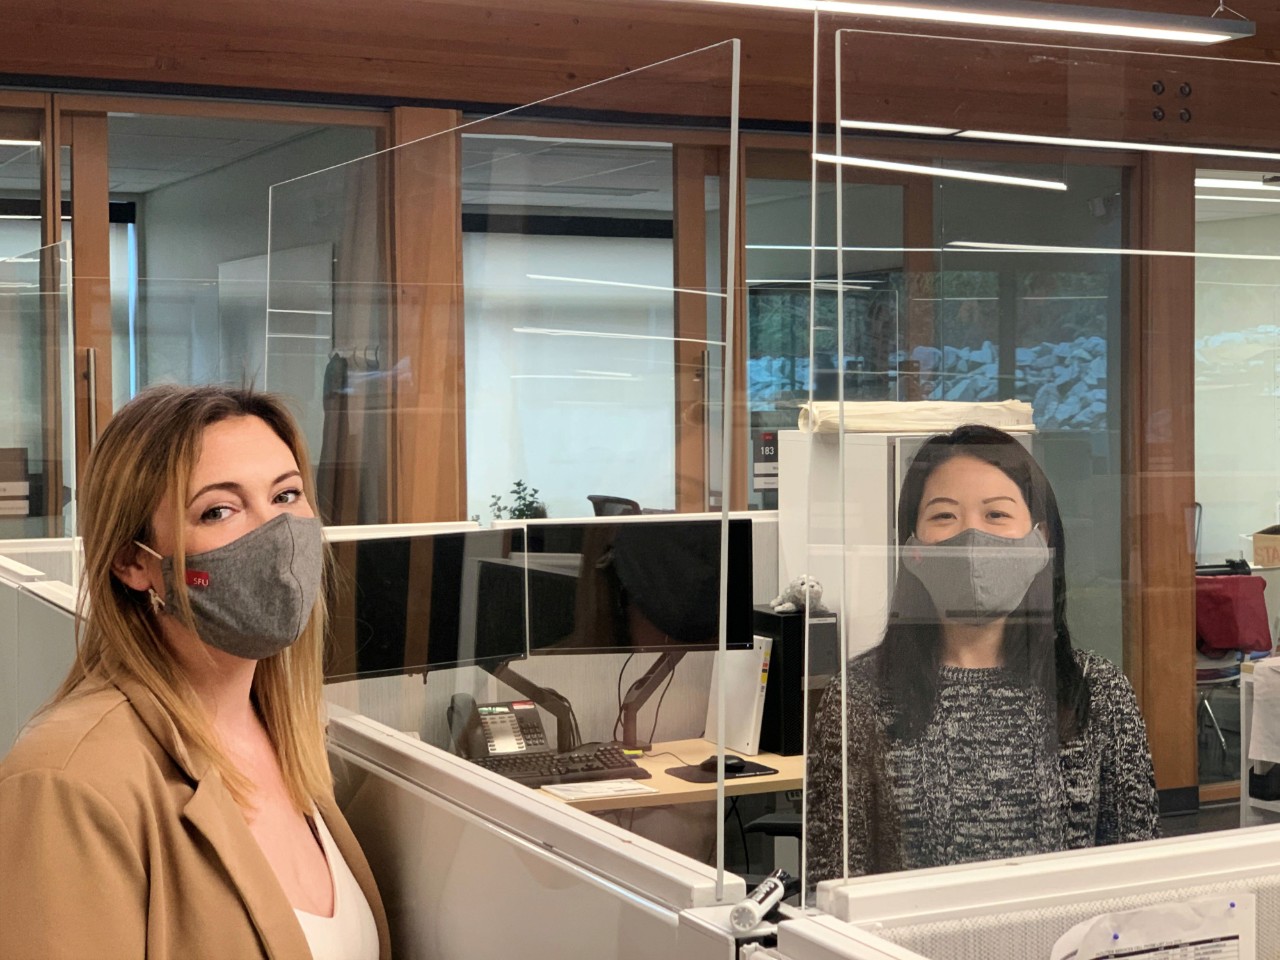 Krystal Ness and Novia Chow look at the camera. Ness is standing and Chow is sitting at her computer desk; both are wearing masks. There is a tall plexiglass barrier between them.